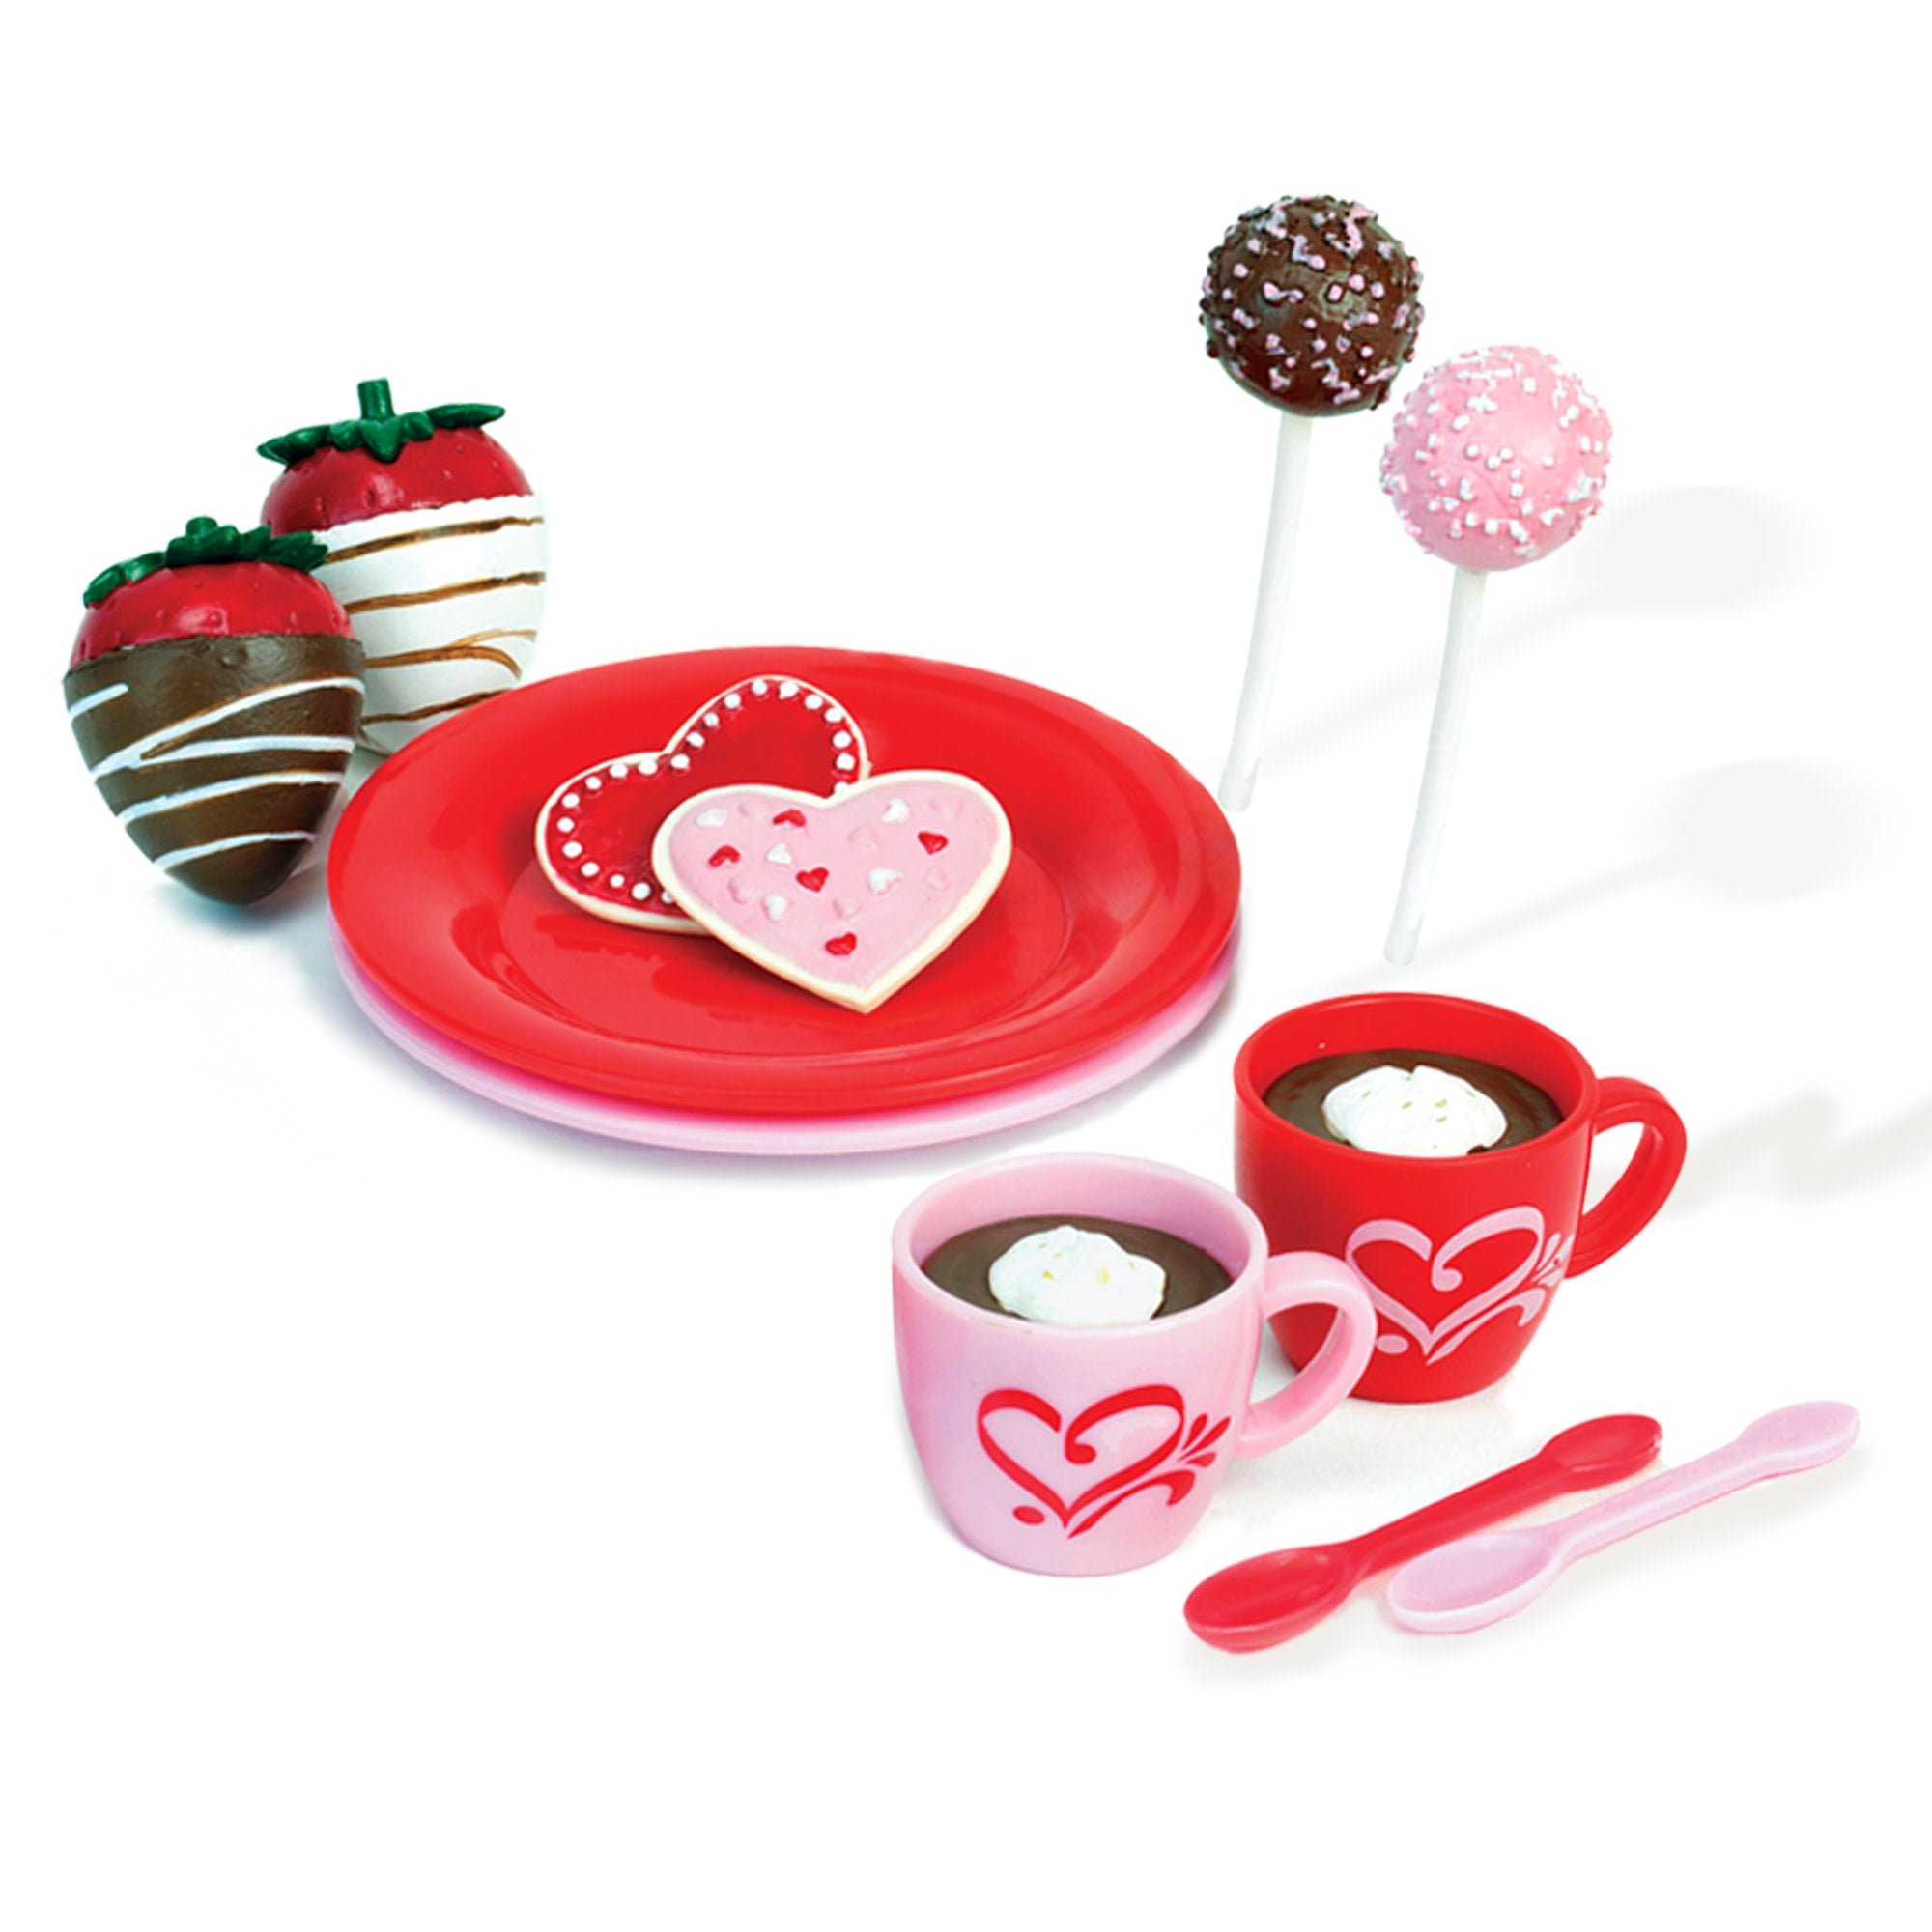 Sophia's Dessert Set with Hot Cocoa for 18 Inch Dolls, Red/Pink